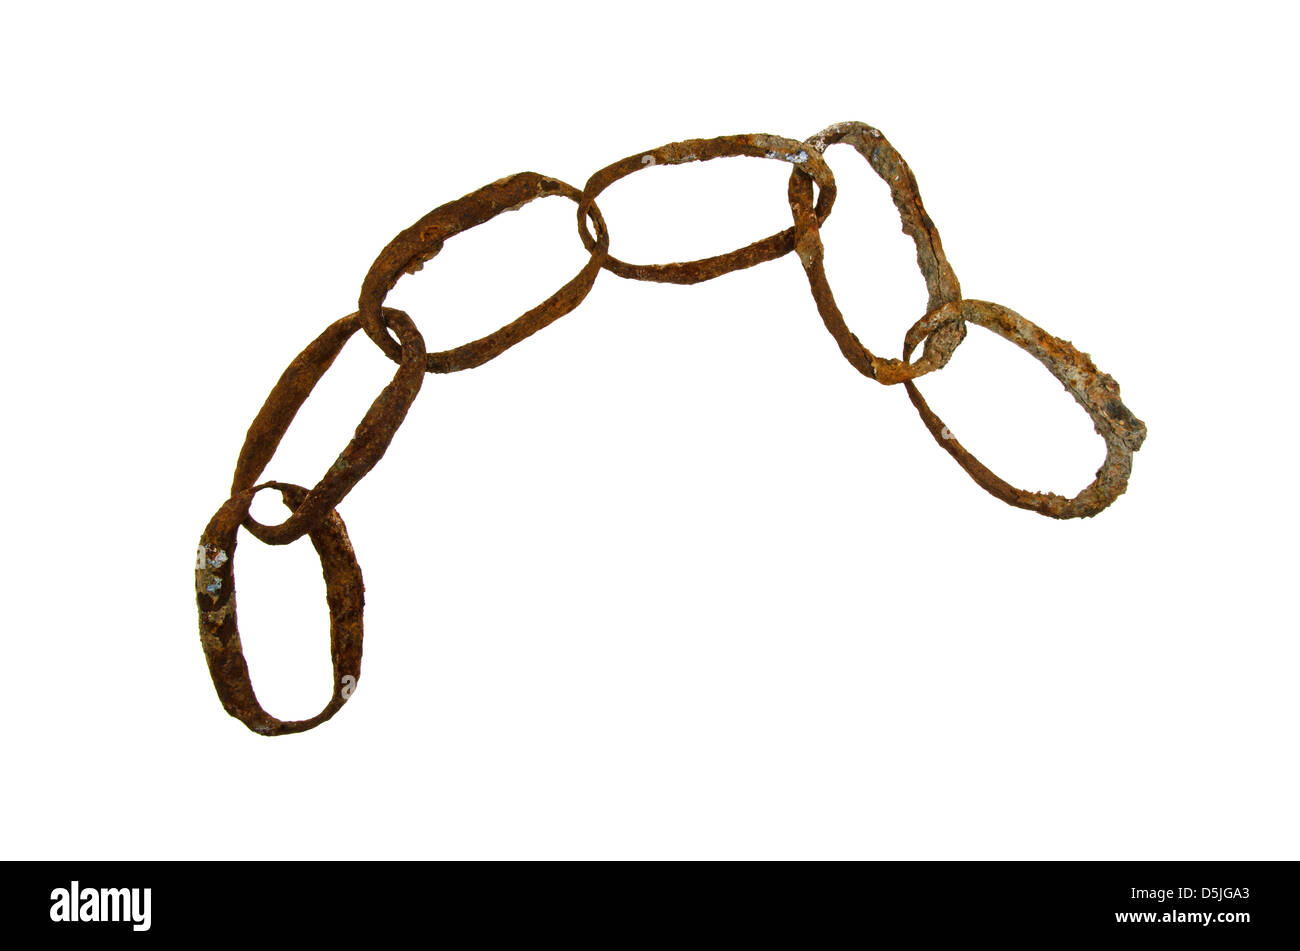 Section of ancient rusted anchor chain found on a Maine beach. Stock Photo